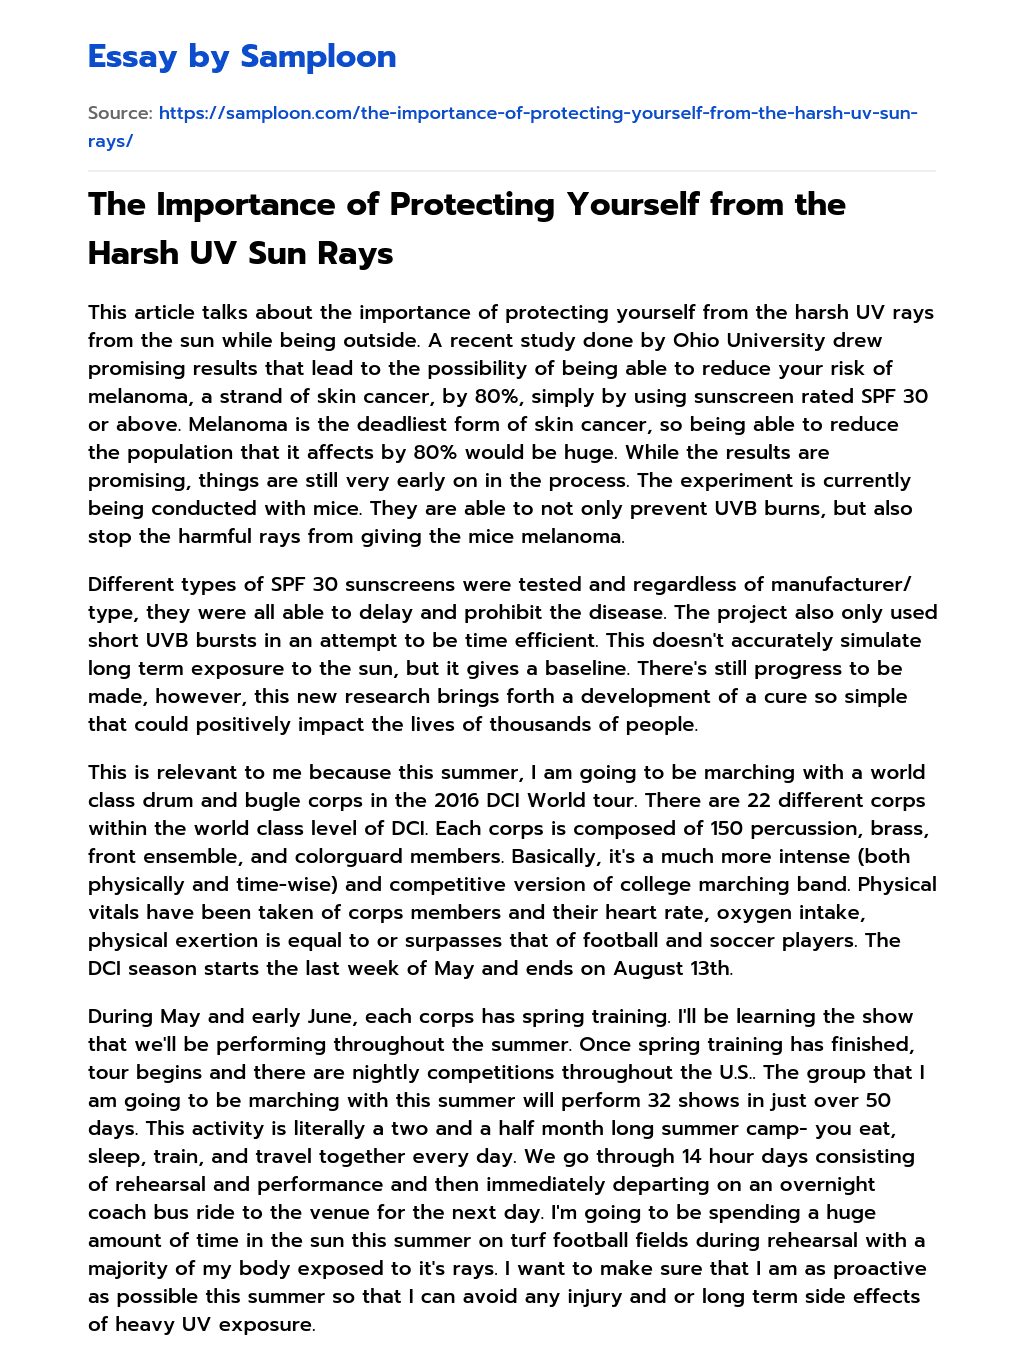 The Importance of Protecting Yourself from the Harsh UV Sun Rays essay